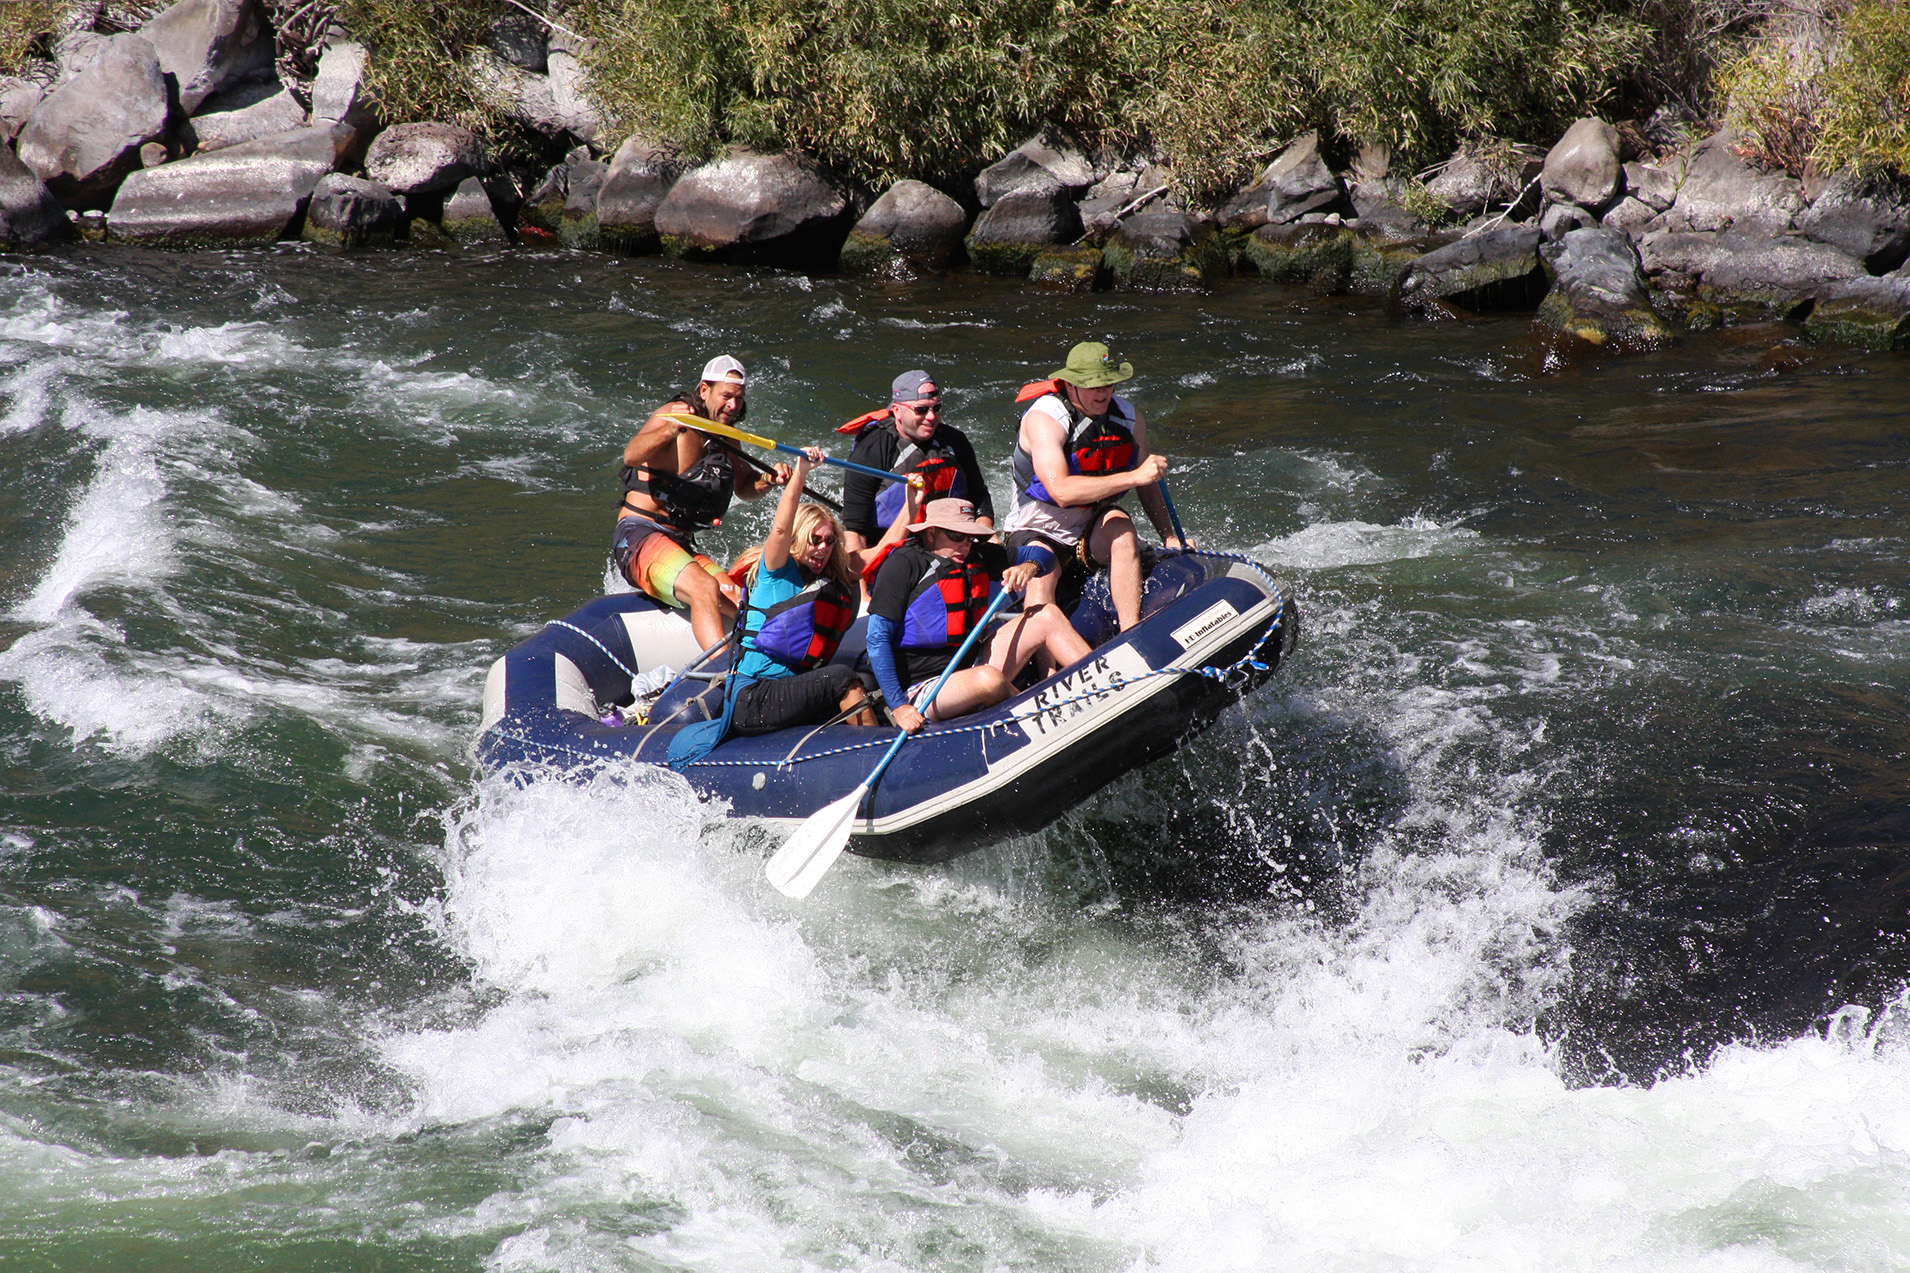 People river rafting on the Deschutes